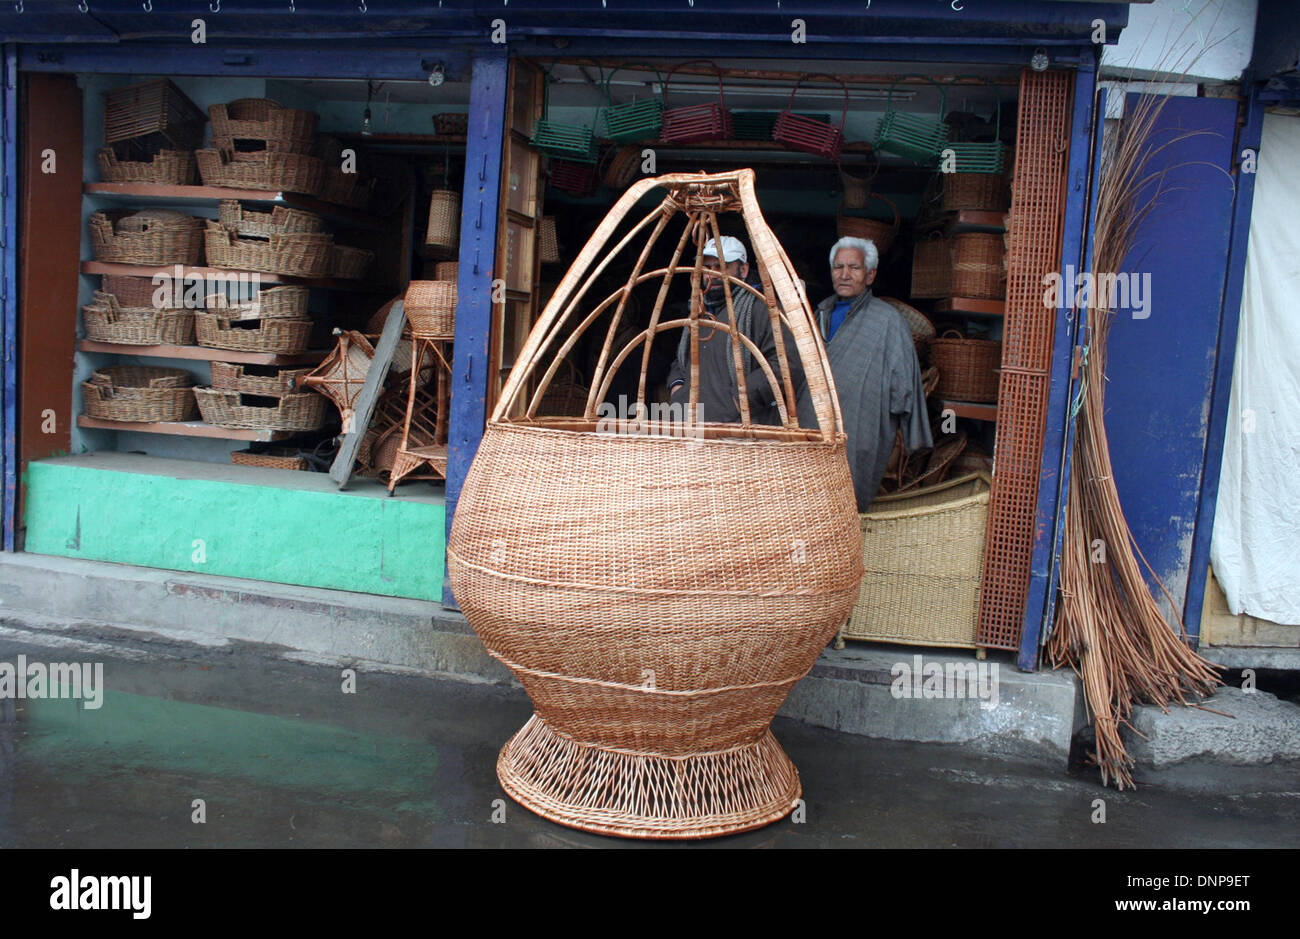 Srinagar, Indian Administered Kashmir03 January) A kashmiri 65 old man Ghulam nabi shaksaaz next right side  his shop Display A  hand made traditional 7 feet  fire pot as kashmir knowns (kangri) of worth rupees indian 25000 shahksaaz says fire pot complete 17 days   The Kangri is an earthenware container with an outer encasement of wickerwork, filled with burning coal and carried under the clothing for heat in winter months in srinagar (Sofi Suhail/ Alamy Live News Stock Photo